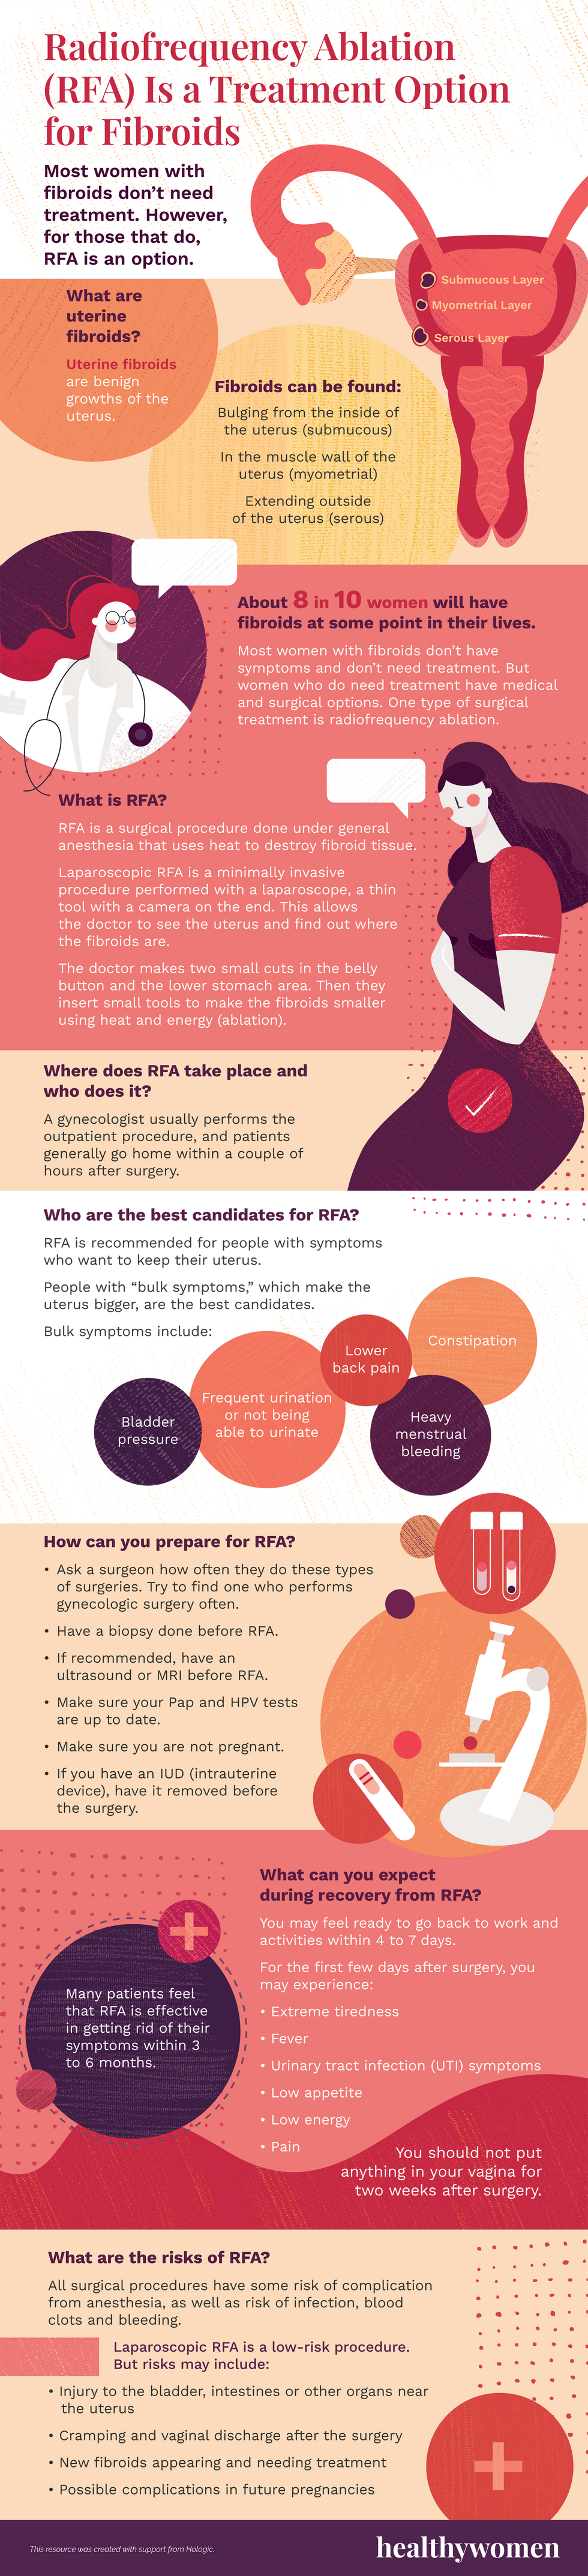 Infographic Radiofrequency Ablation (RFA) Is a Treatment Option for Fibroids. Click the image to open the PDF